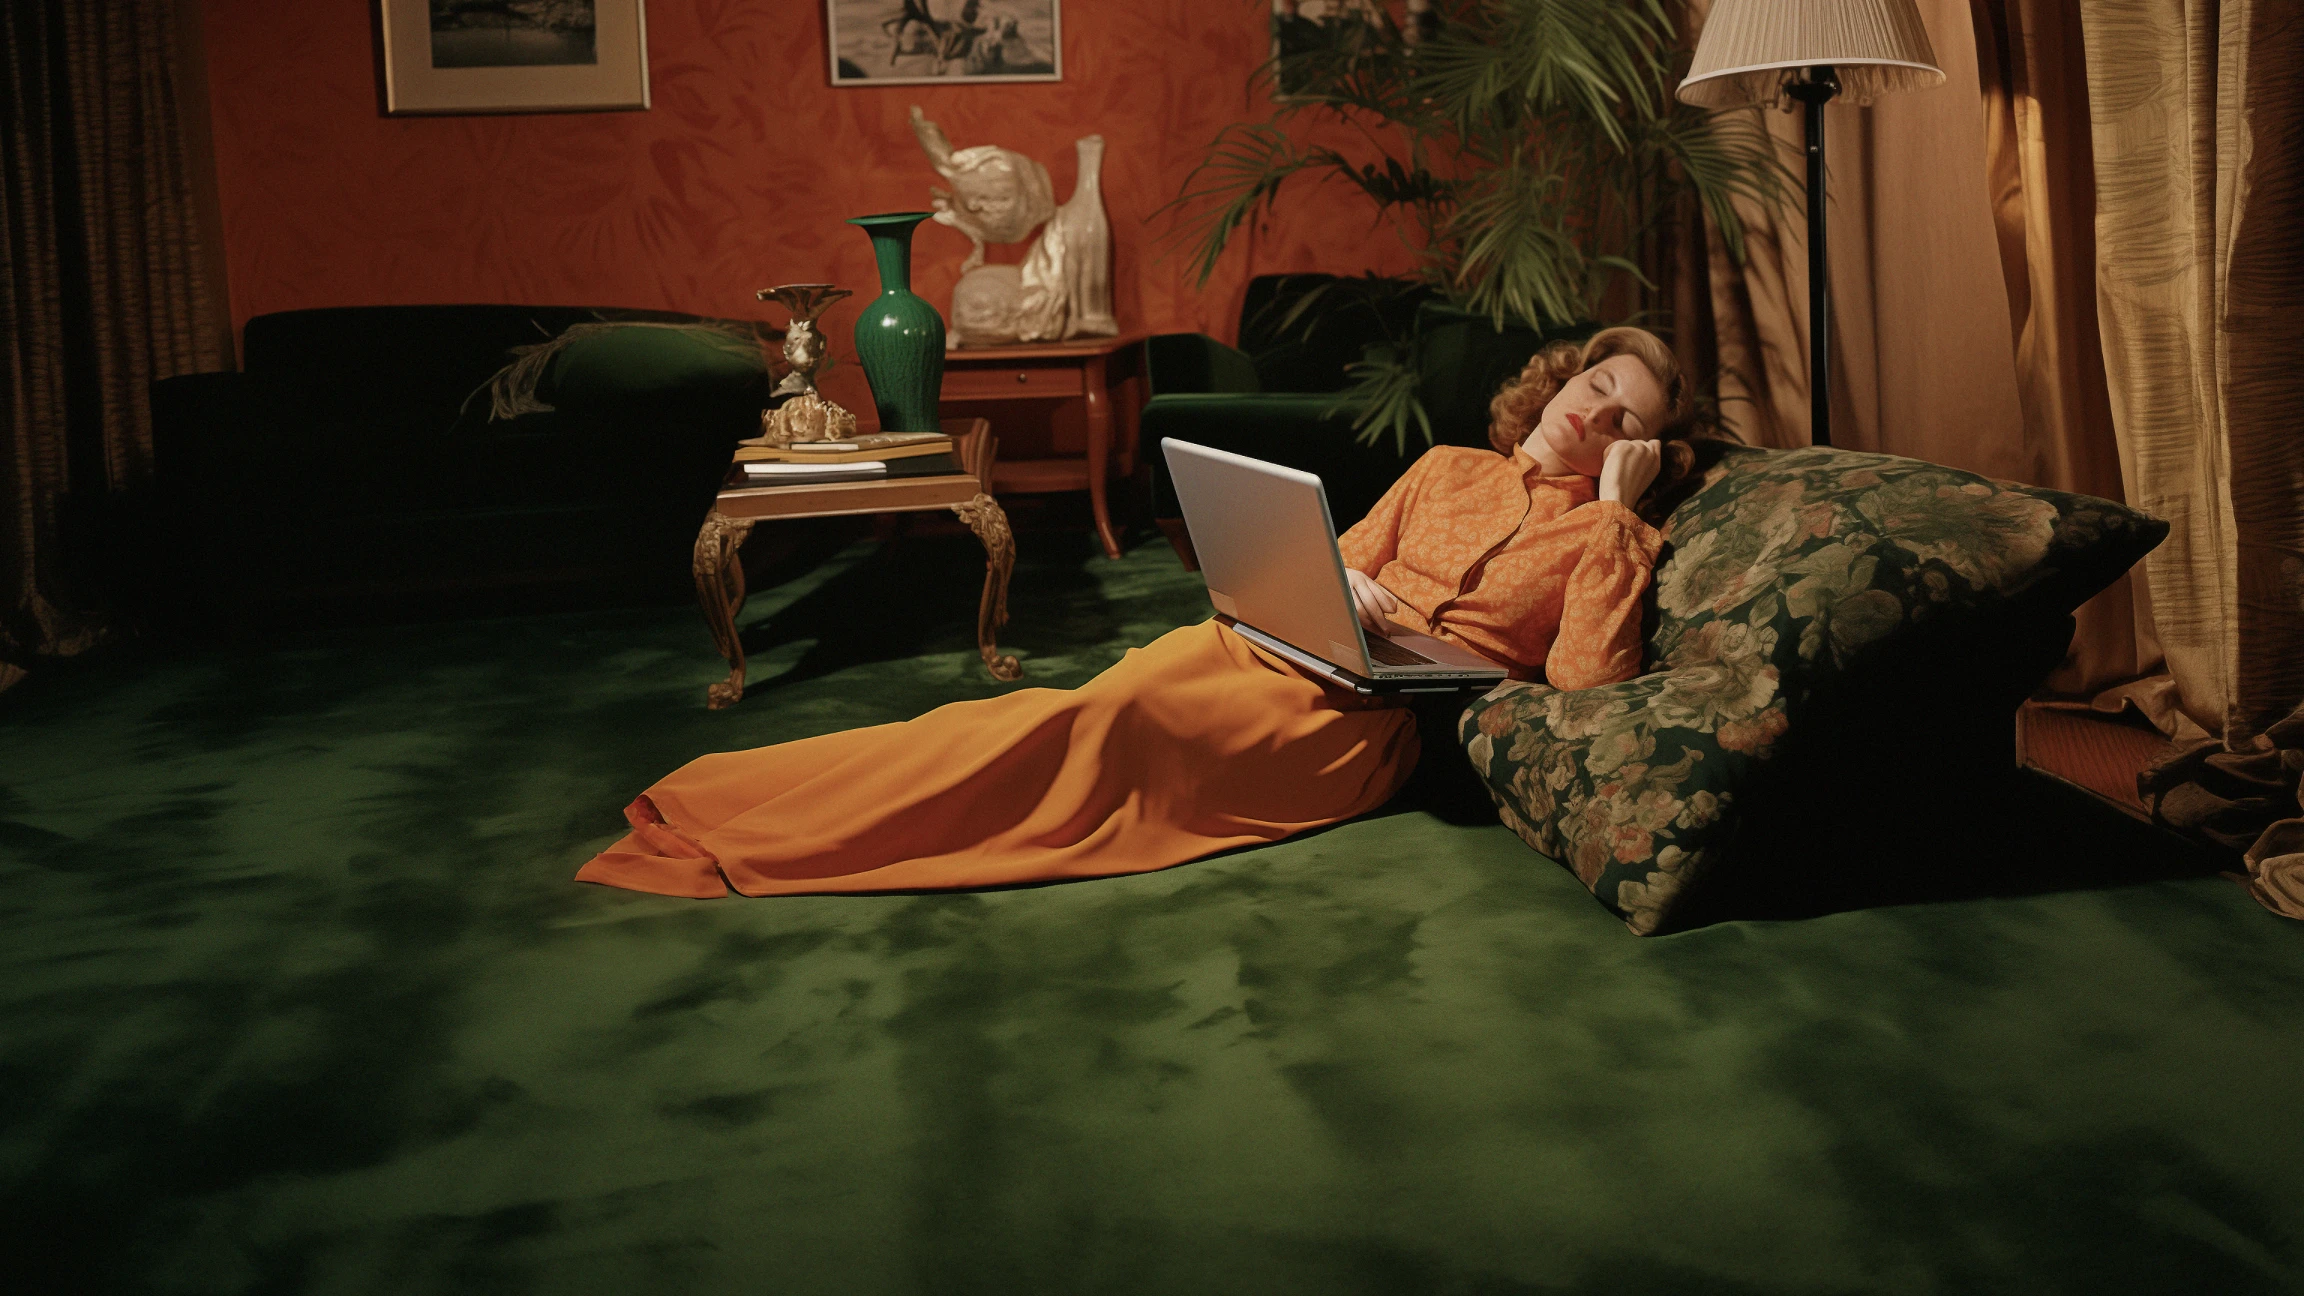 a woman dozing off while using a laptop in a midcentury living room - image generated by MidJourney